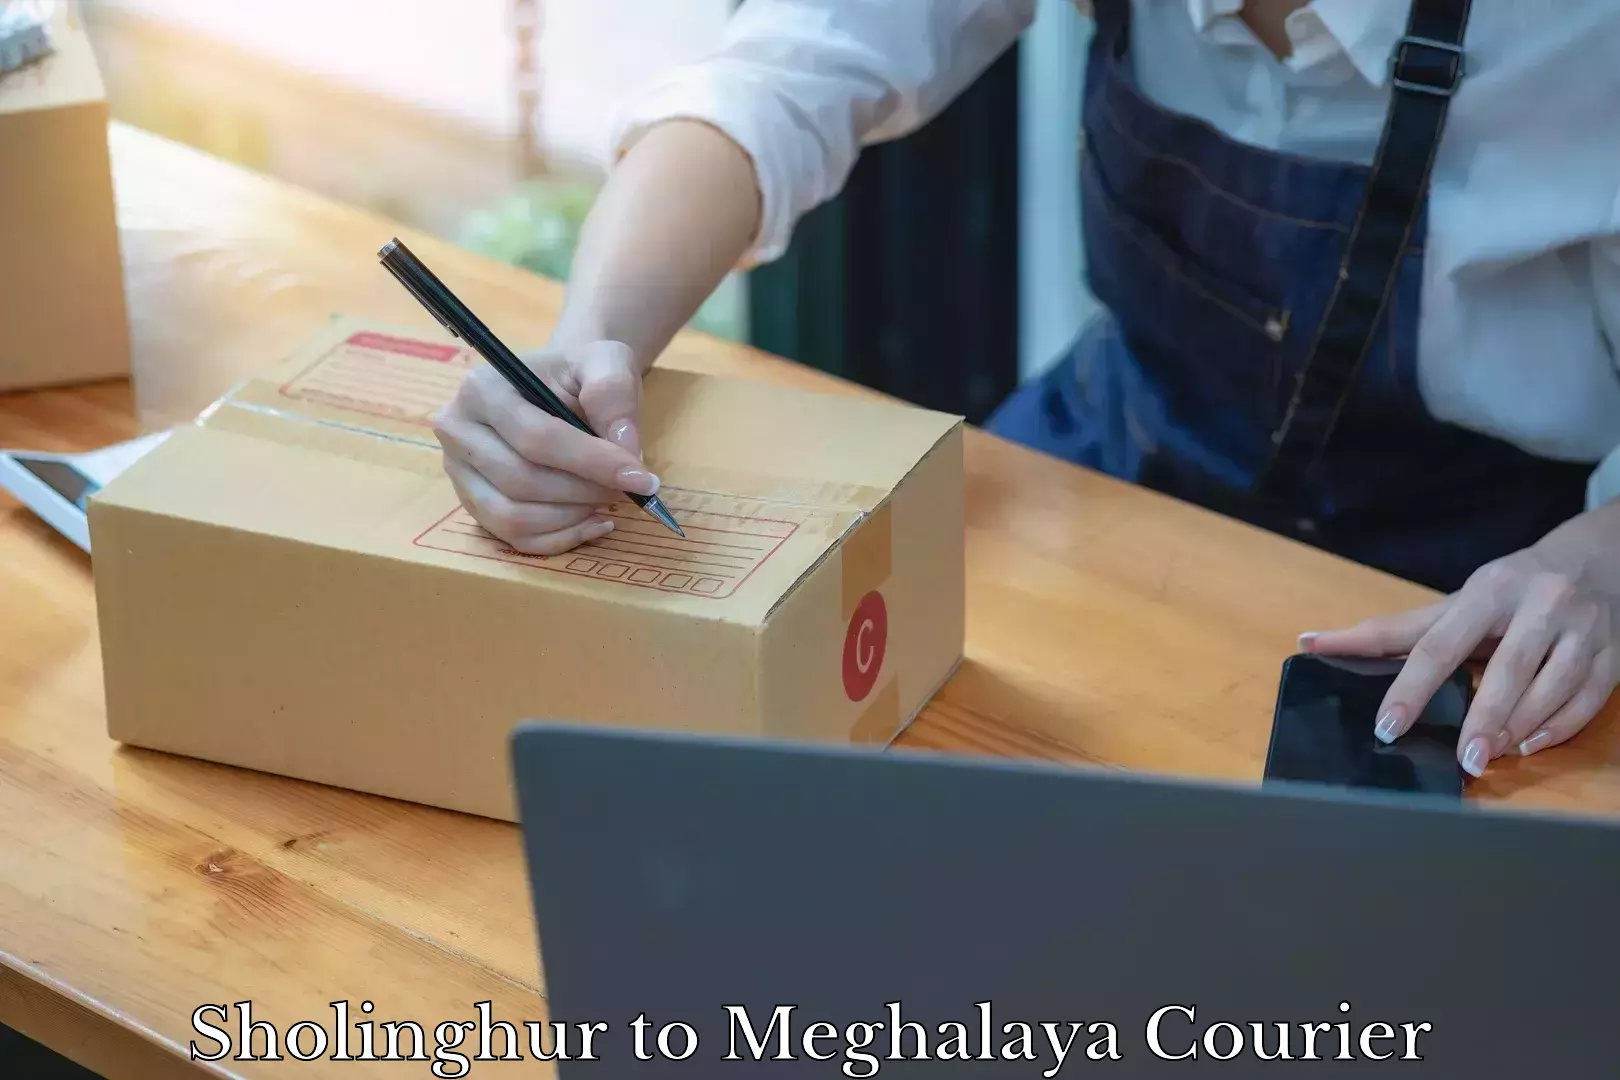 Affordable relocation services in Sholinghur to Meghalaya